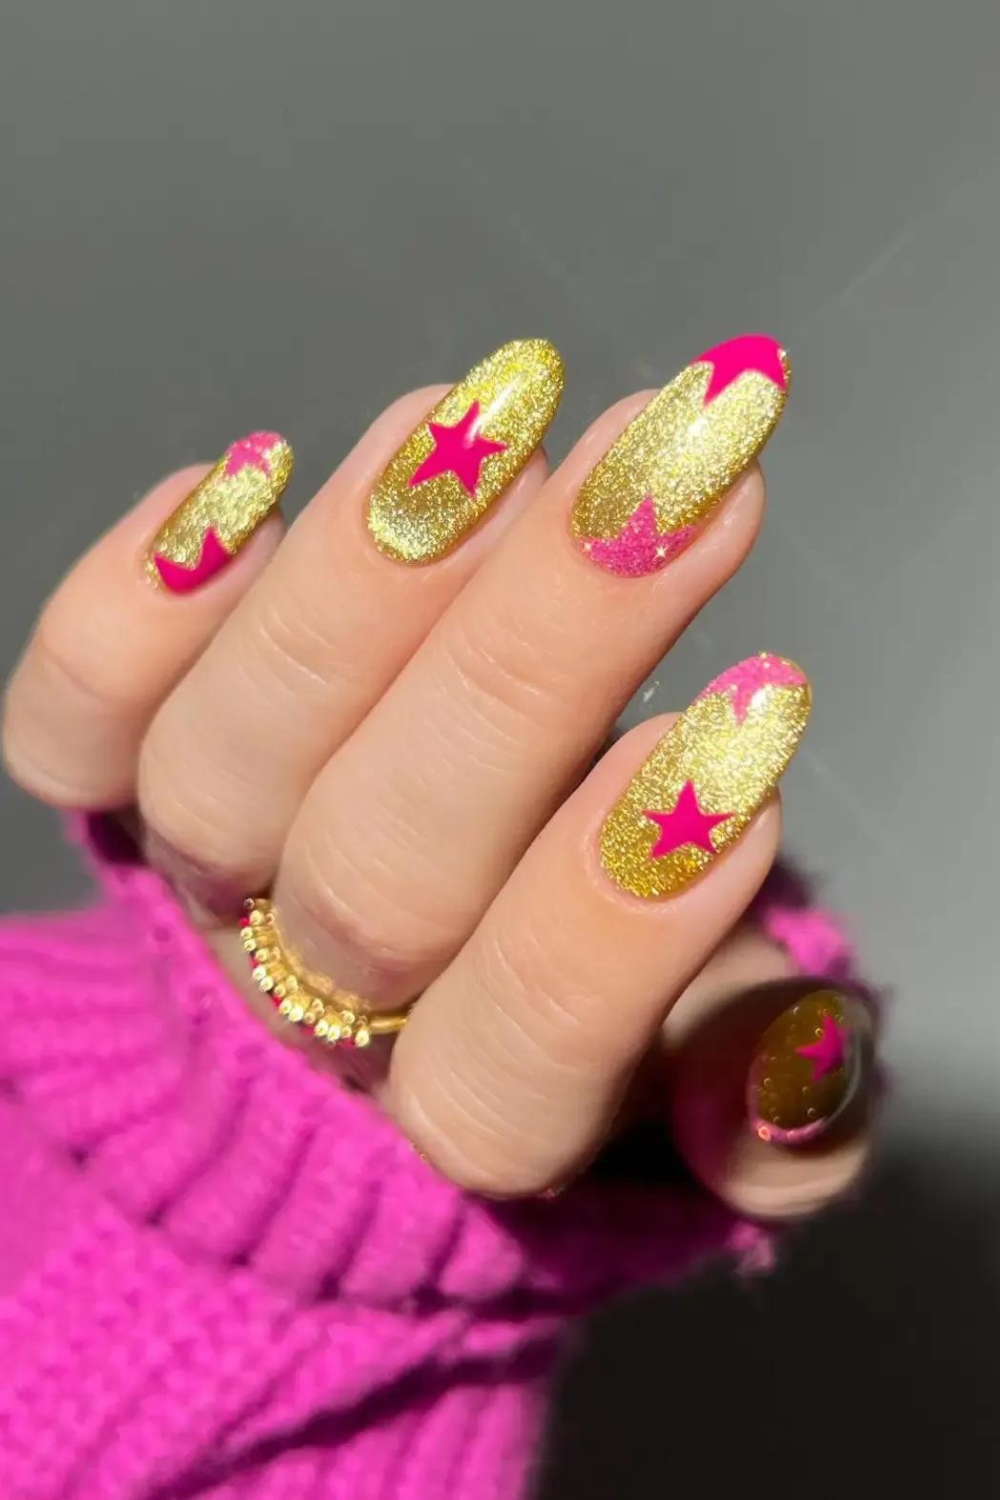 43 Swoonworthy January Nails to Break in the New Year!